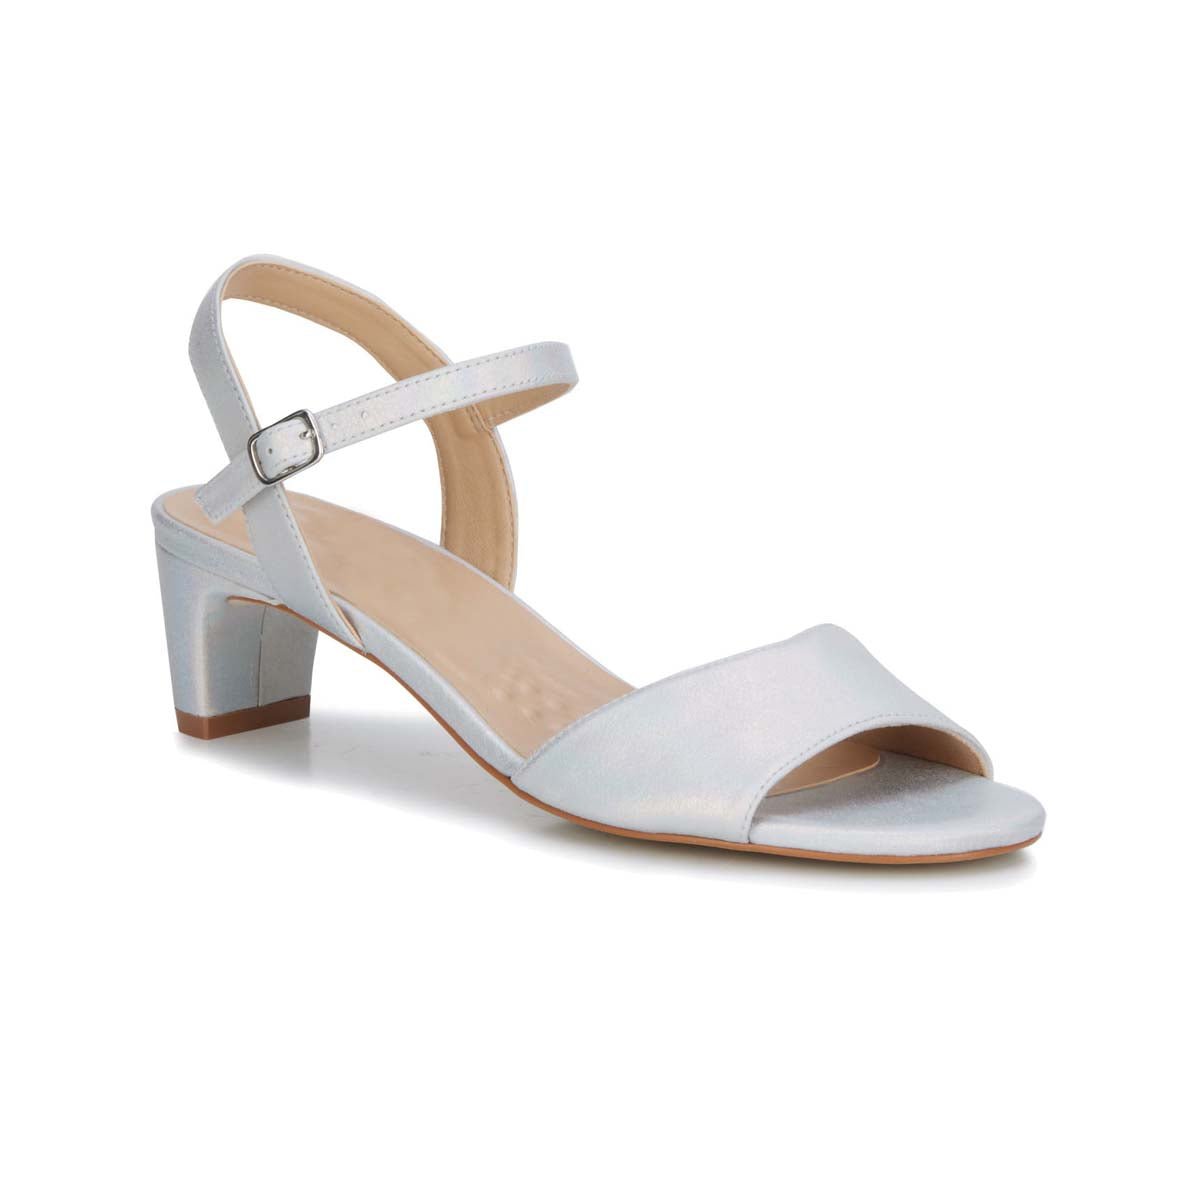 ROS HOMMERSON LYDIA WOMEN ADJUSTABLE BUCKLE STRAP SANDAL IN SILVER IRRIDESCENT CRINKLE - TLW Shoes